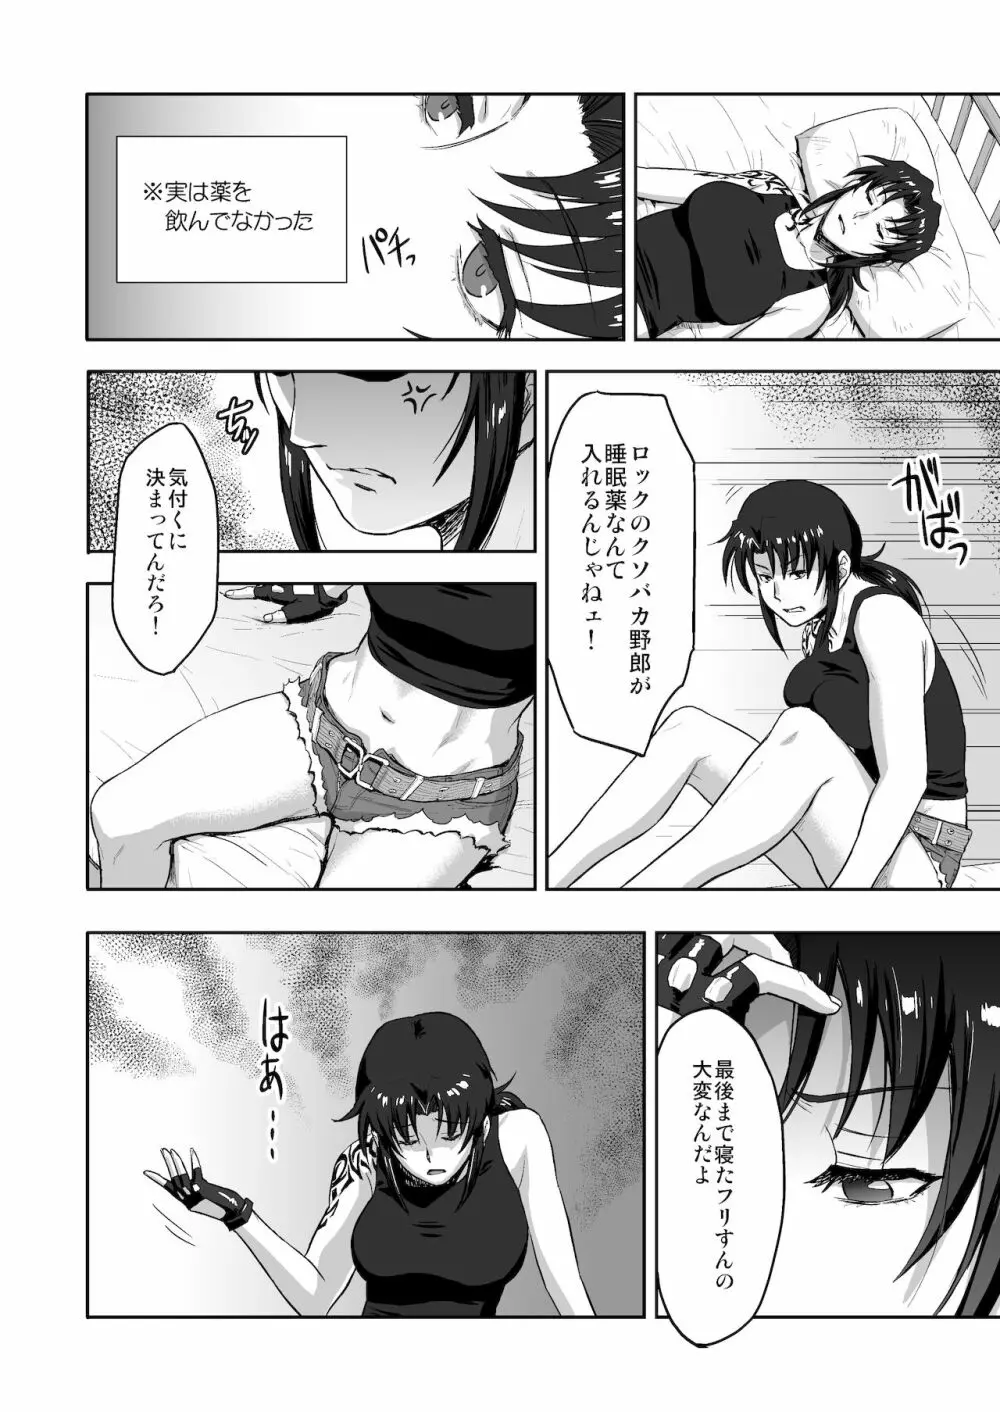 SLEEPING Revy - page23